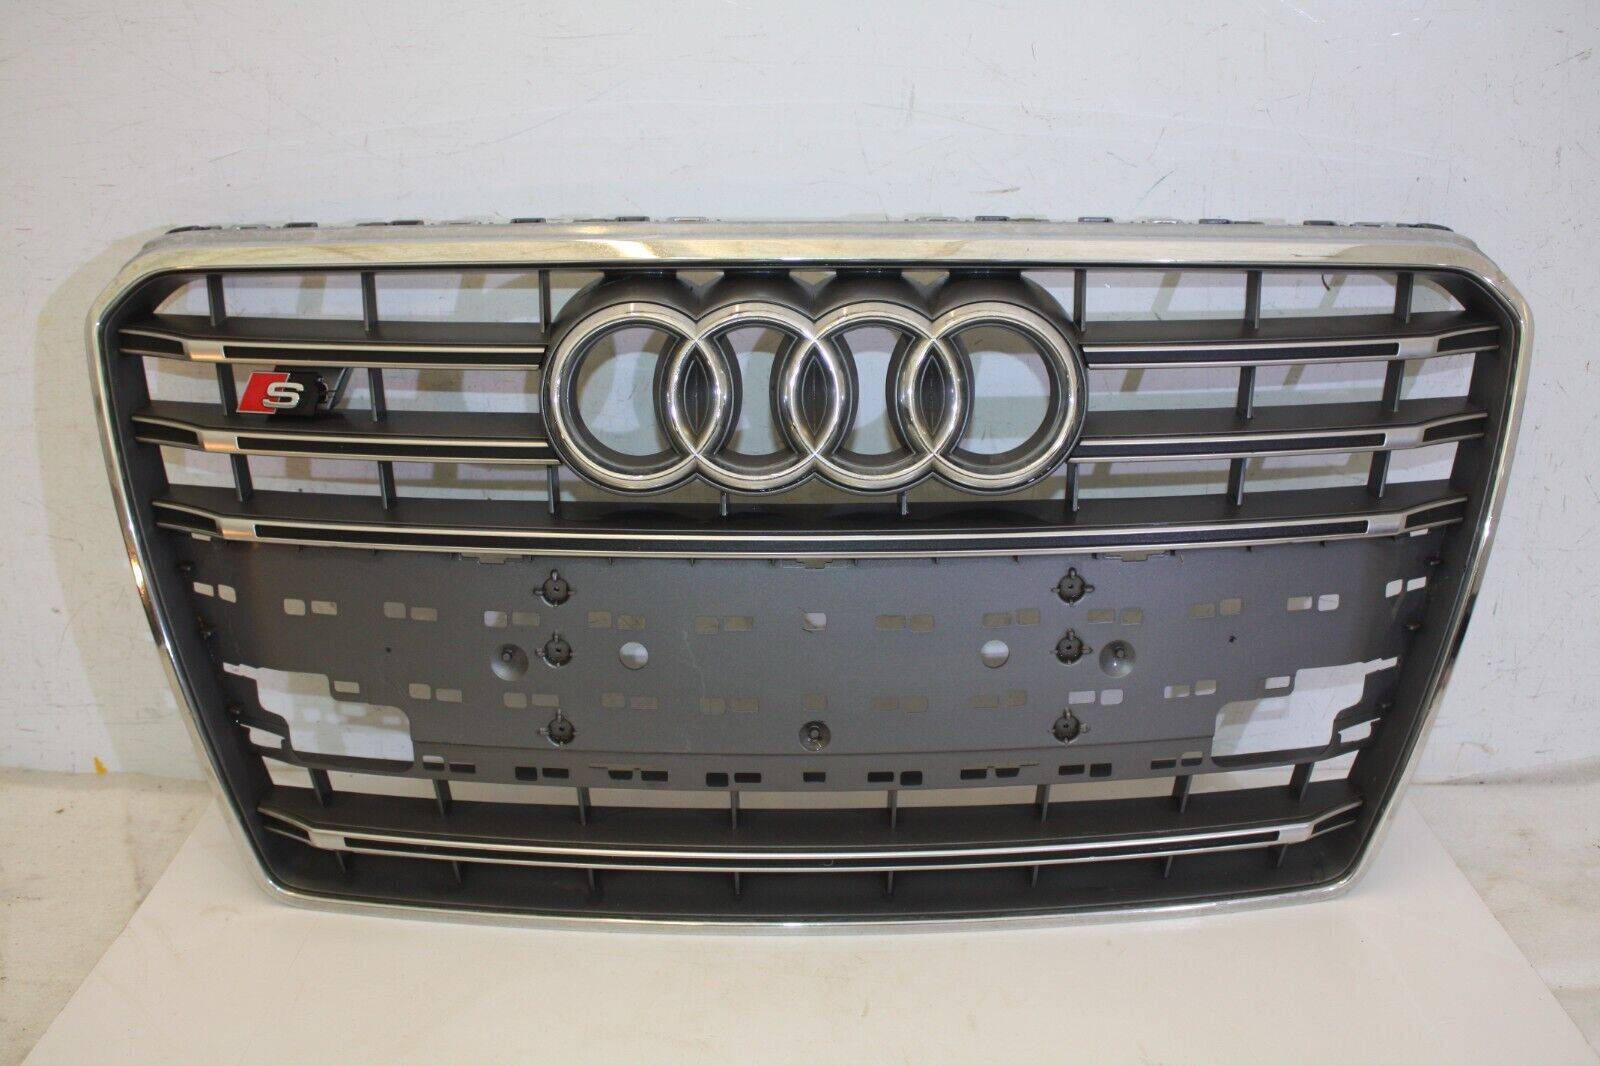 Audi S7 Front Bumper Grill 2011 TO 2014 4G8853651A Genuine 176238678014